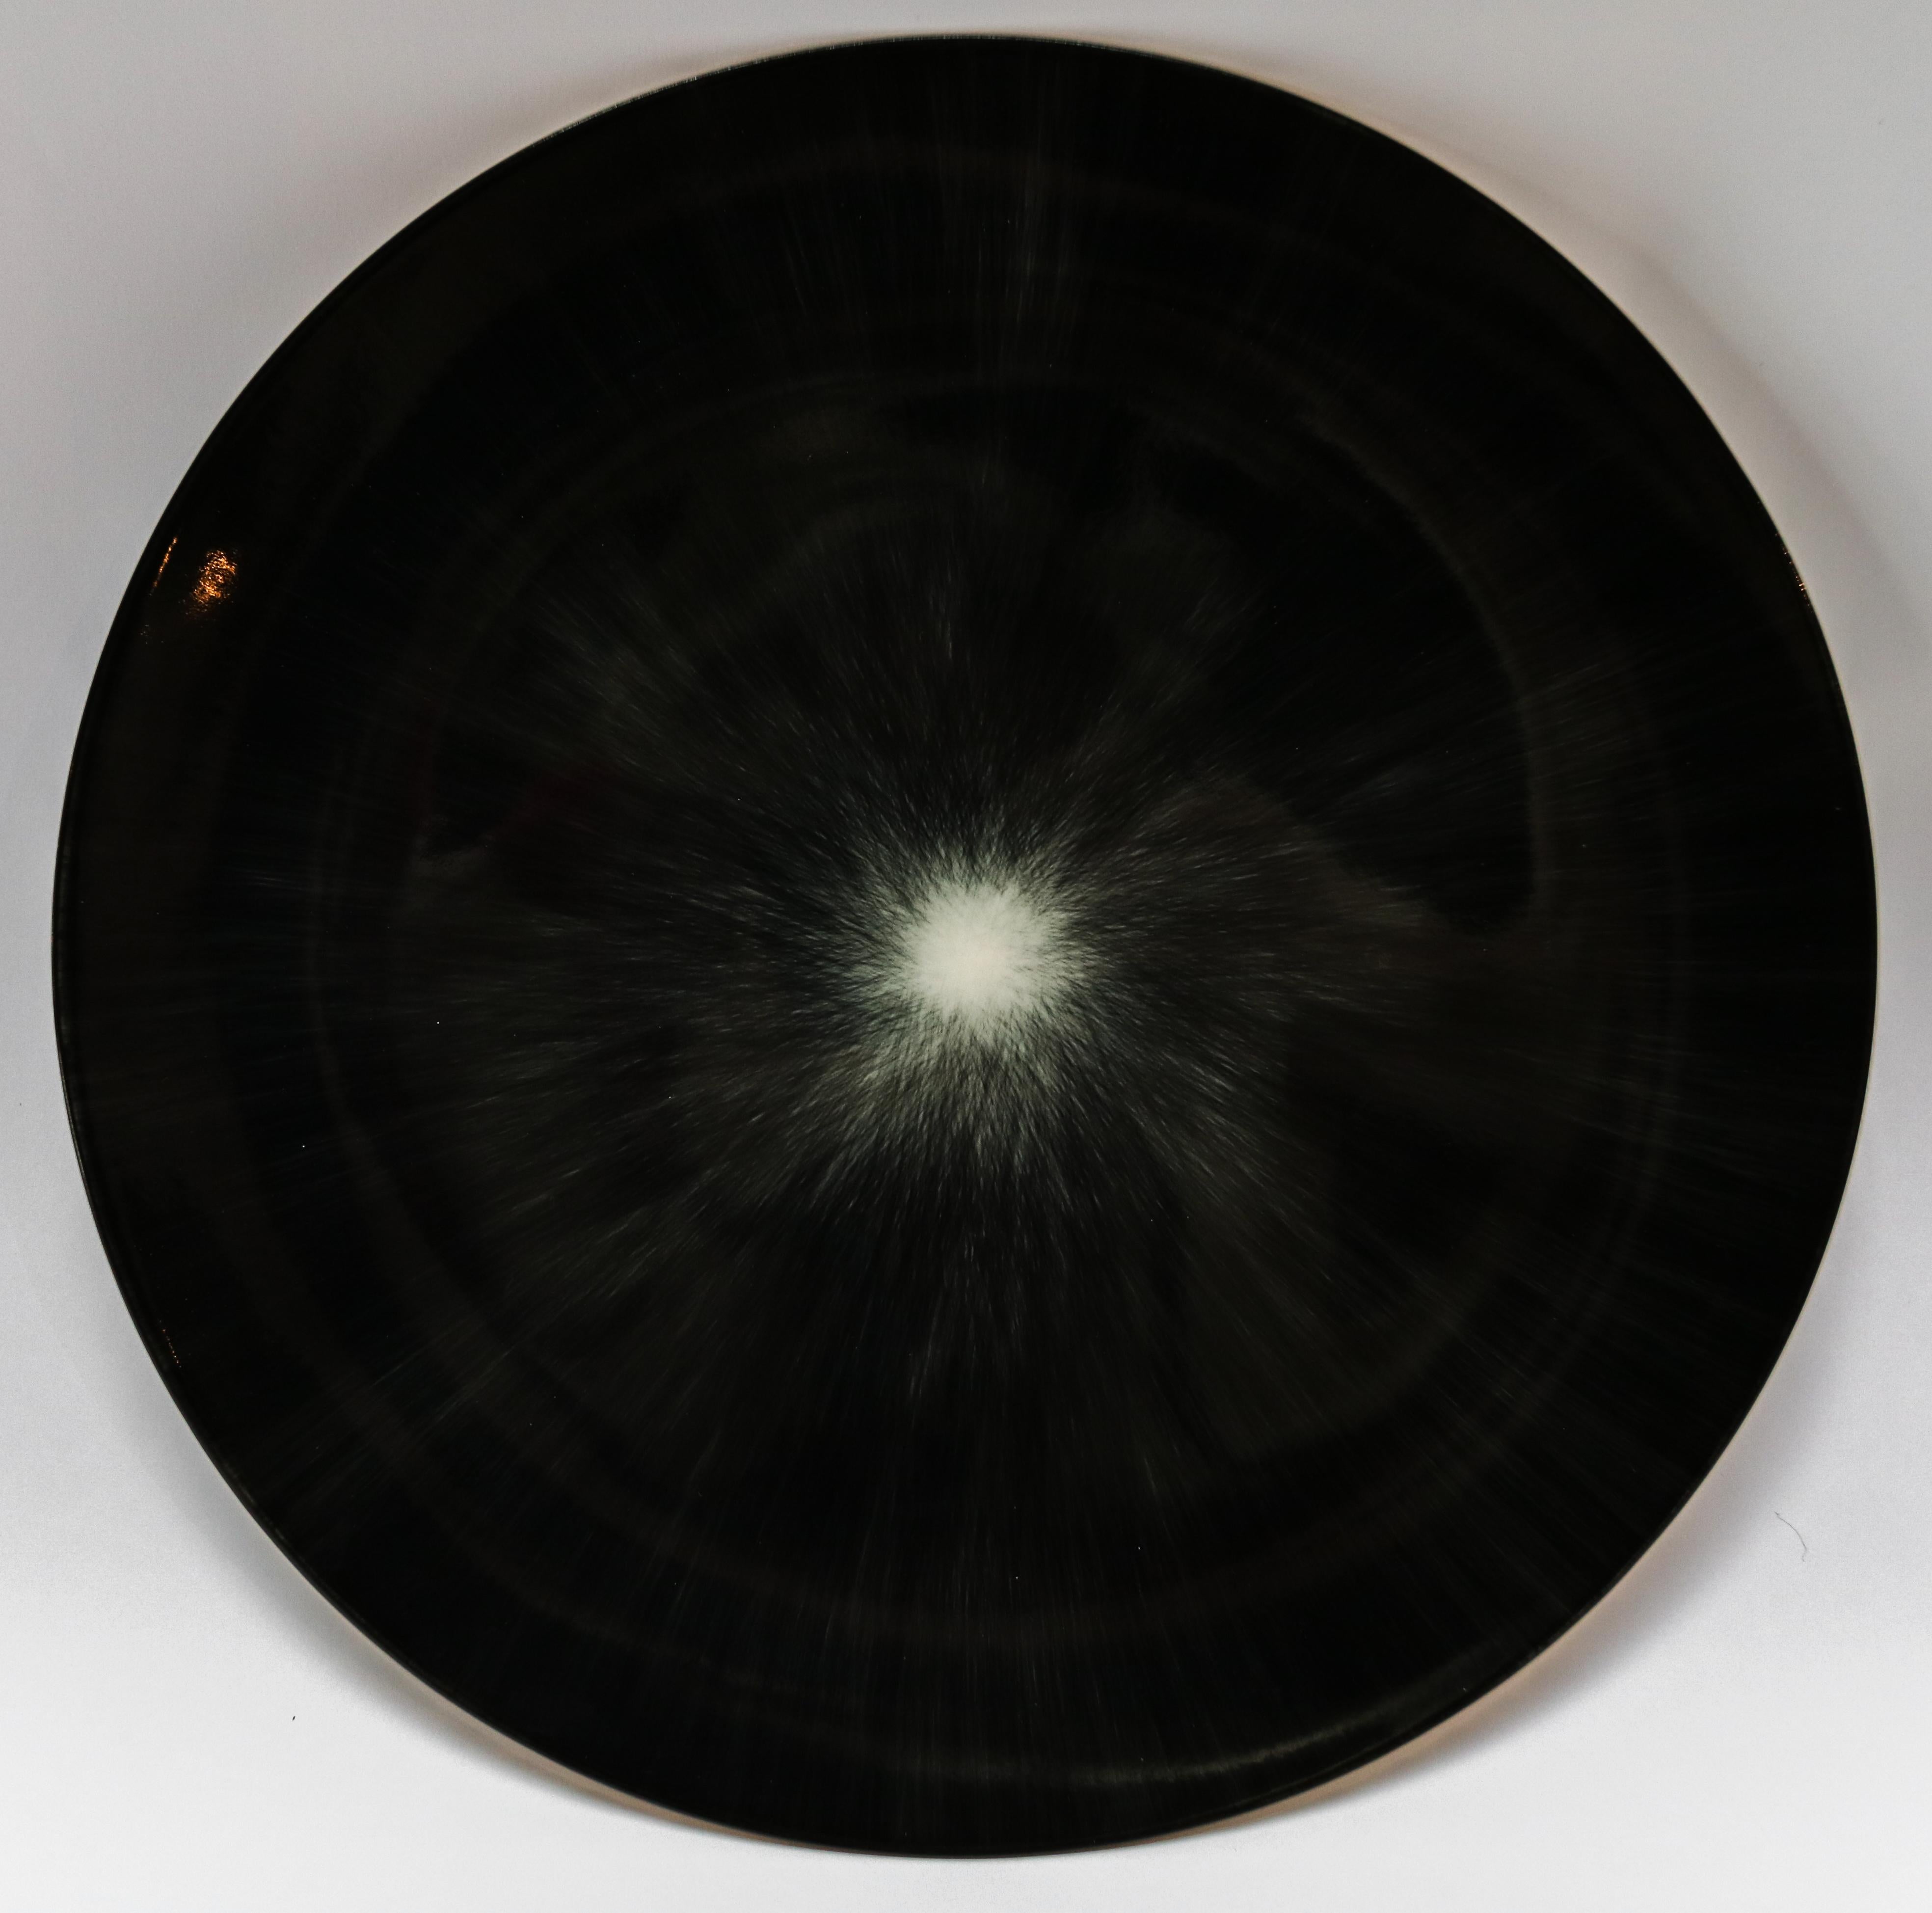 Ann Demeulemeester for Serax Dé dinner plate / charger in black / off white. Hand painted with a starburst pattern. Measures: 28cm diameter x 1.8 cm high. Must be purchased in quantities of two.